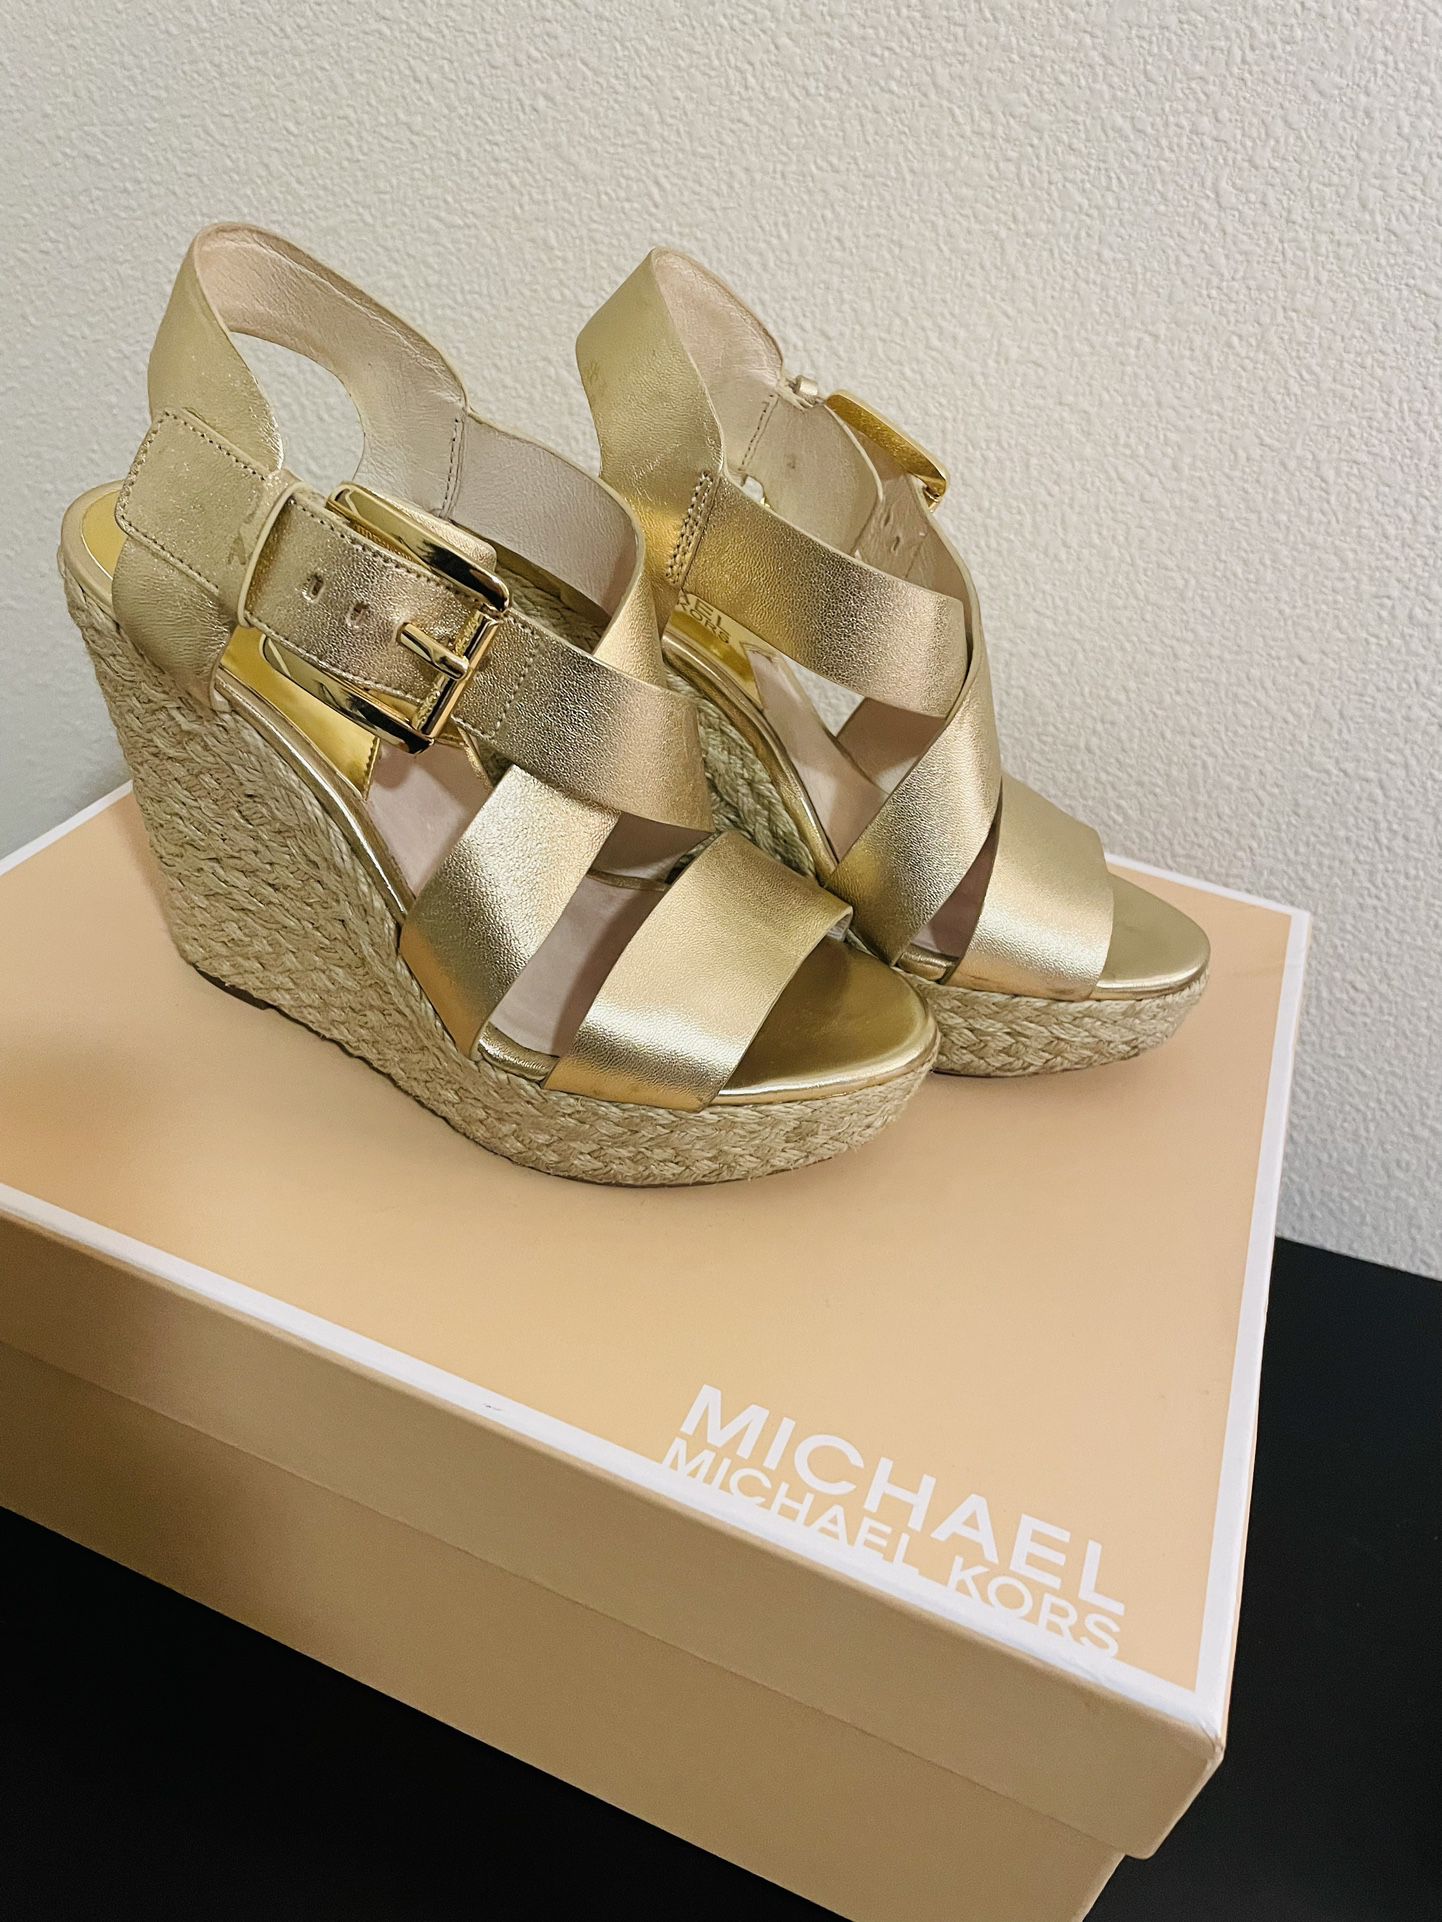 Women's Size 4 Michael Kors Sandals for Sale in Portland, OR - OfferUp